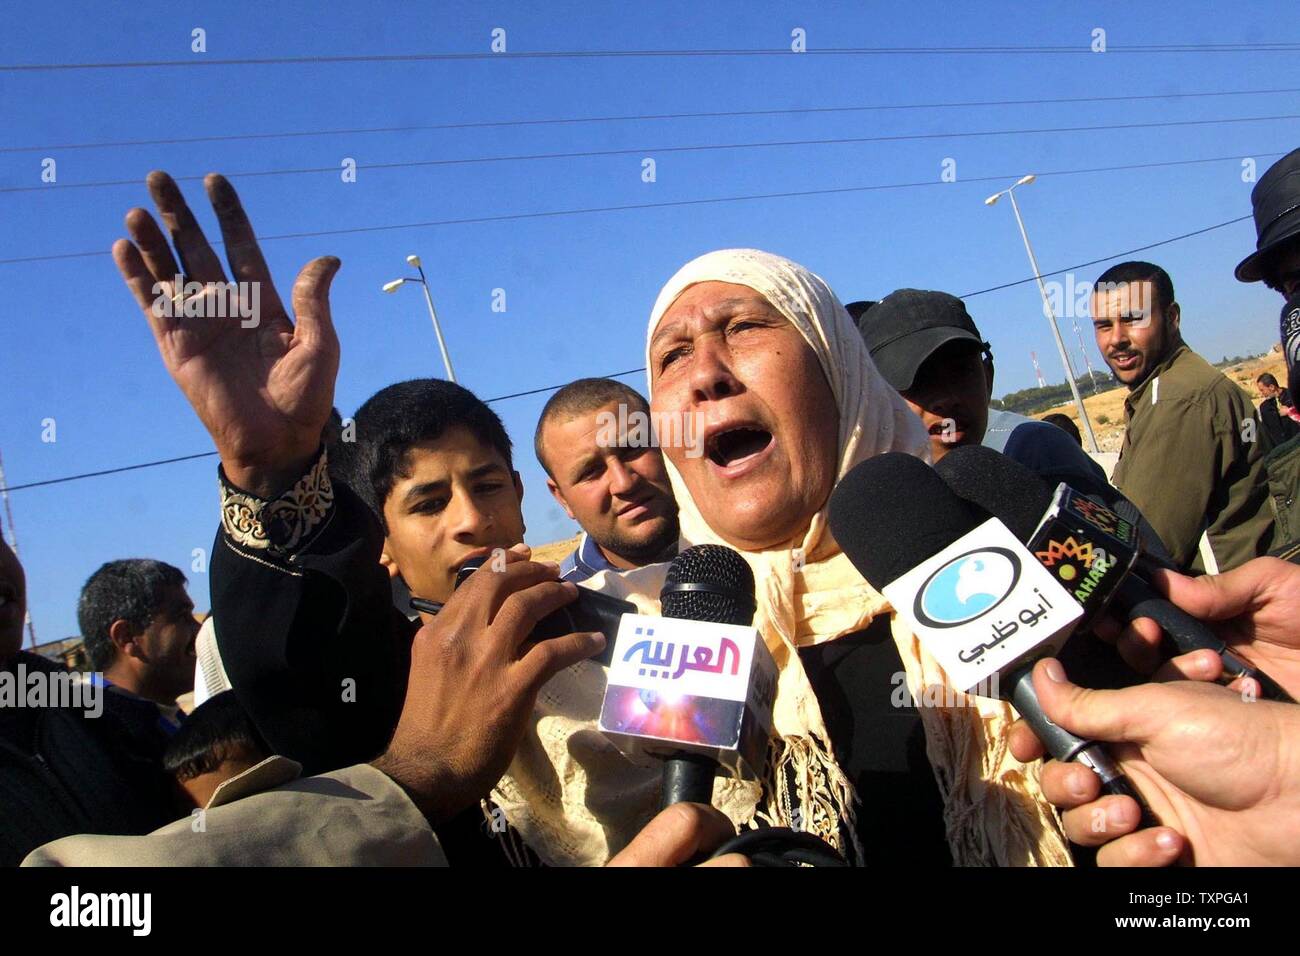 Palestinian relatives are greet the prisoners after being released by authorities from an Israeli jail, at the Erez Crossing, northern Gaza Strip, on January 29, 2004. Israel released 400 Palestinian prisoners Thursday as part of a swap with Lebanese guerrilla group Hezbollah. Jubilant relatives greeted the freed prisoners at checkpoints Gaza Strip with cheers of thanks to Hezbollah. (UPI photo/Ismail Mohamad) Stock Photo